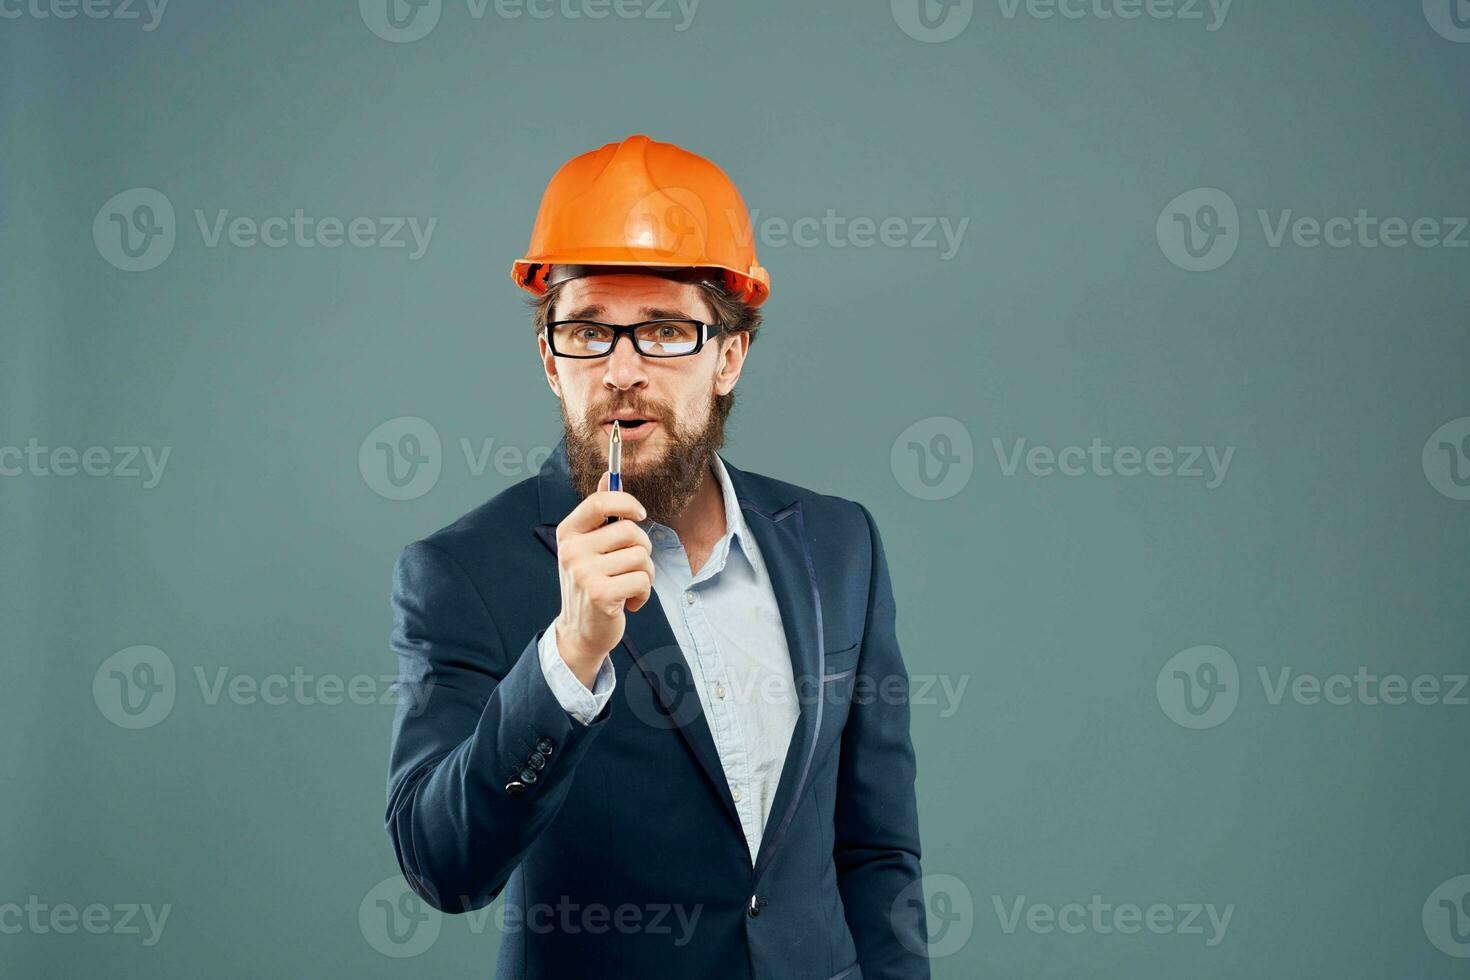 Business man in suit orange hard hat industry official Professional photo